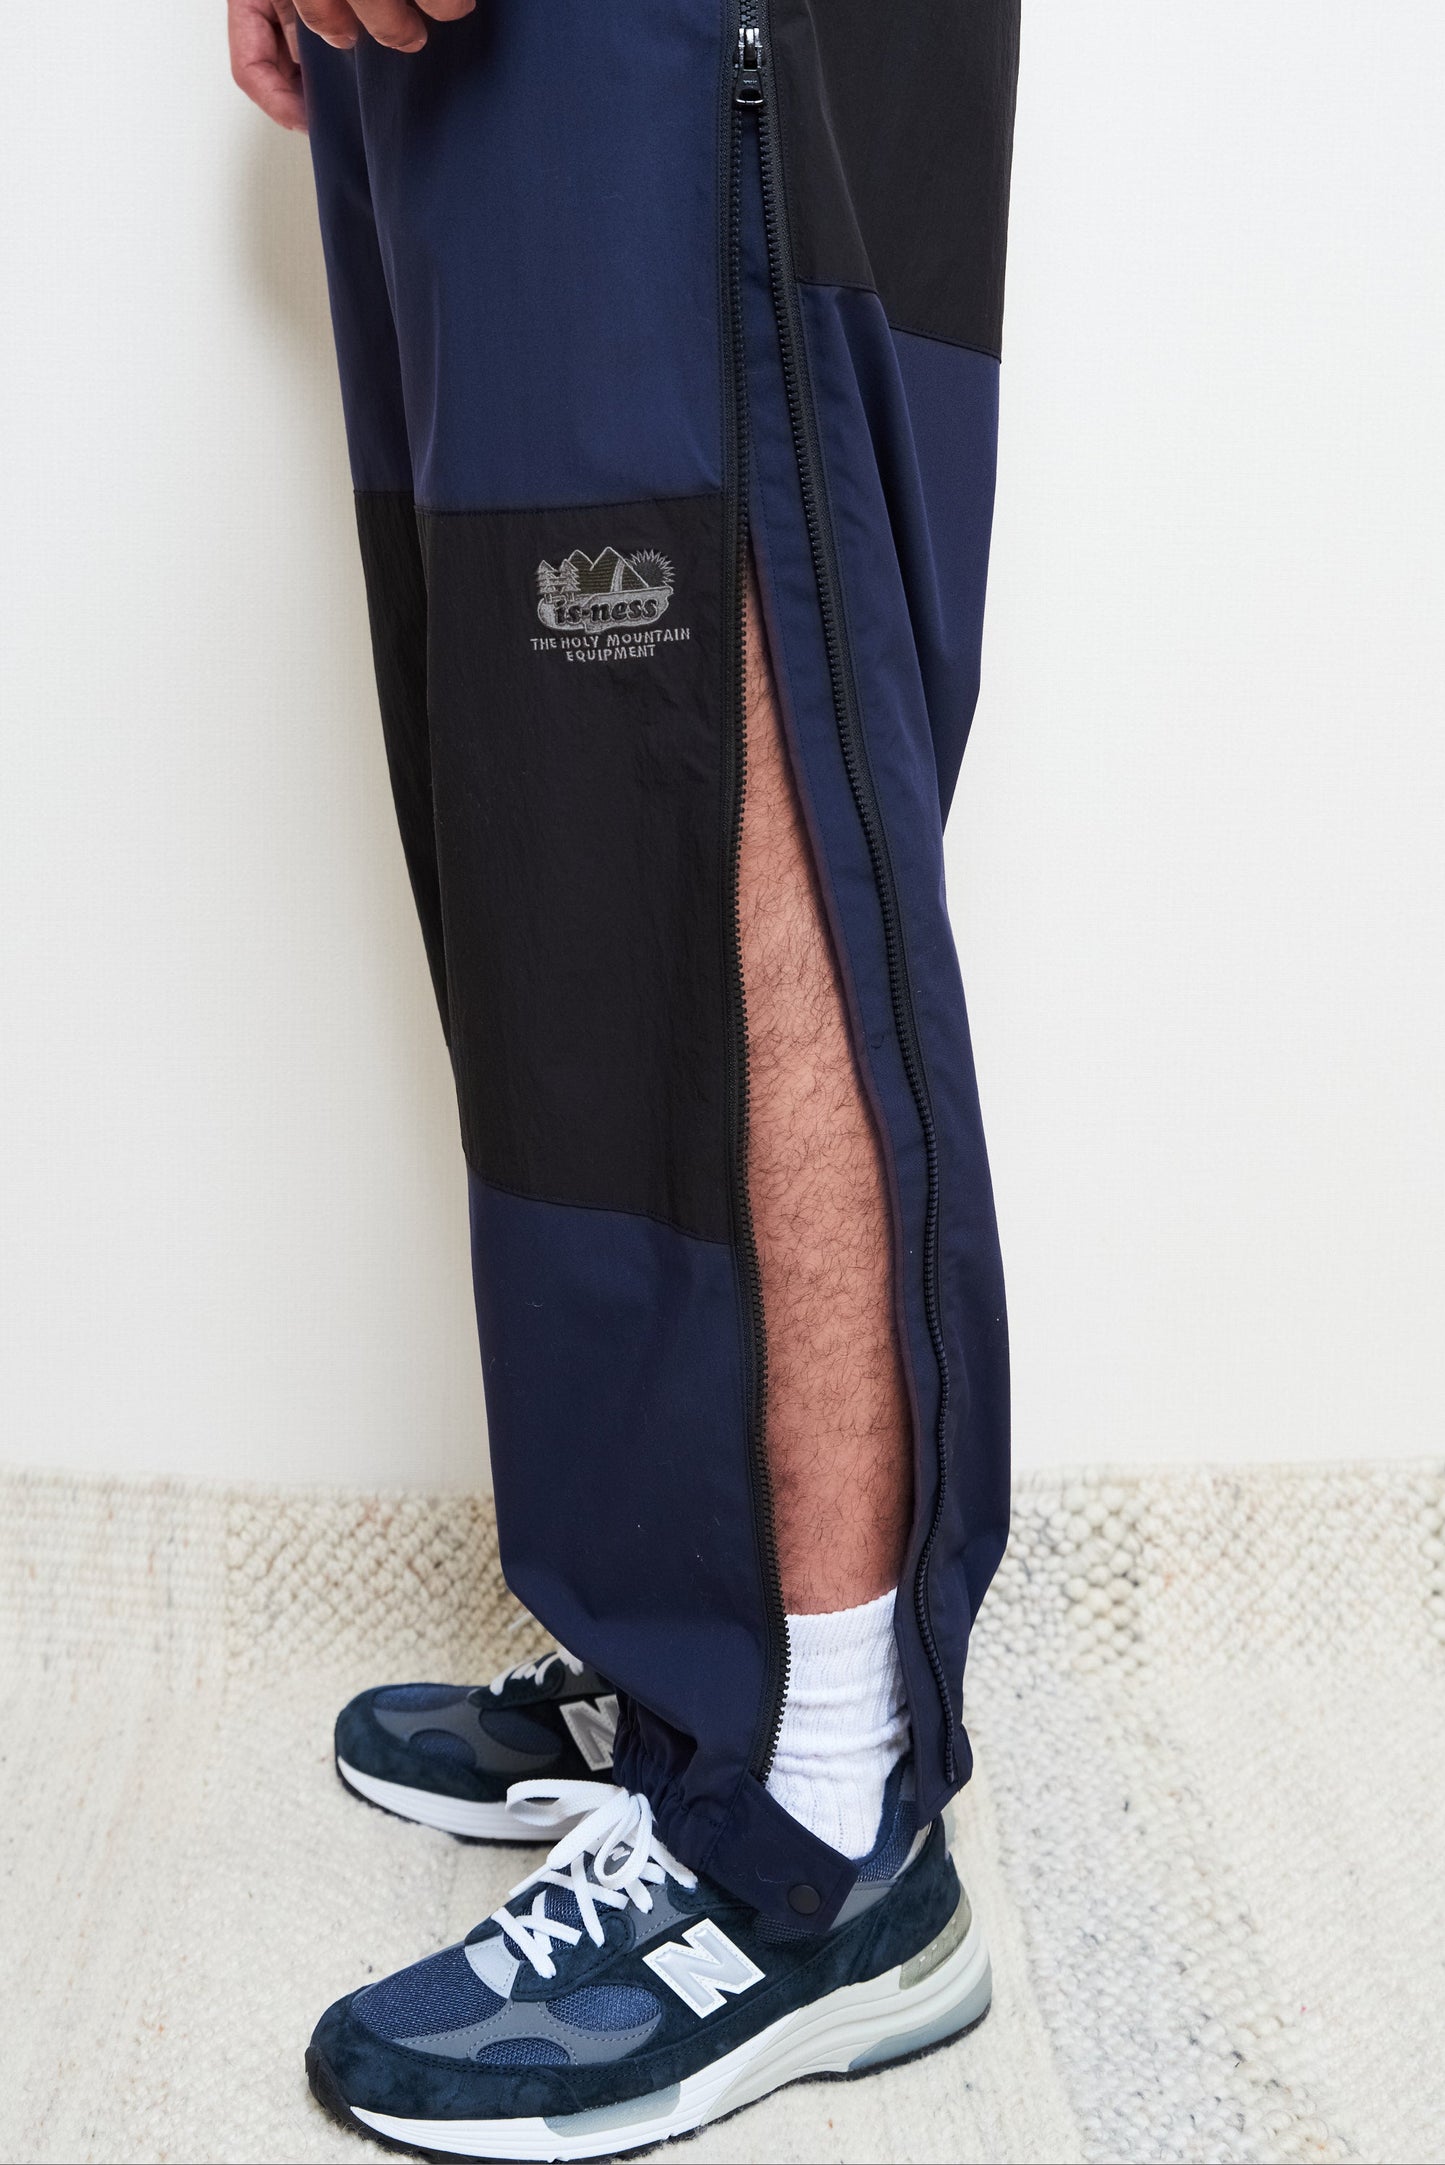 THE HOLY MOUNTAIN VENTILATION PANTS is-ness online shop 12